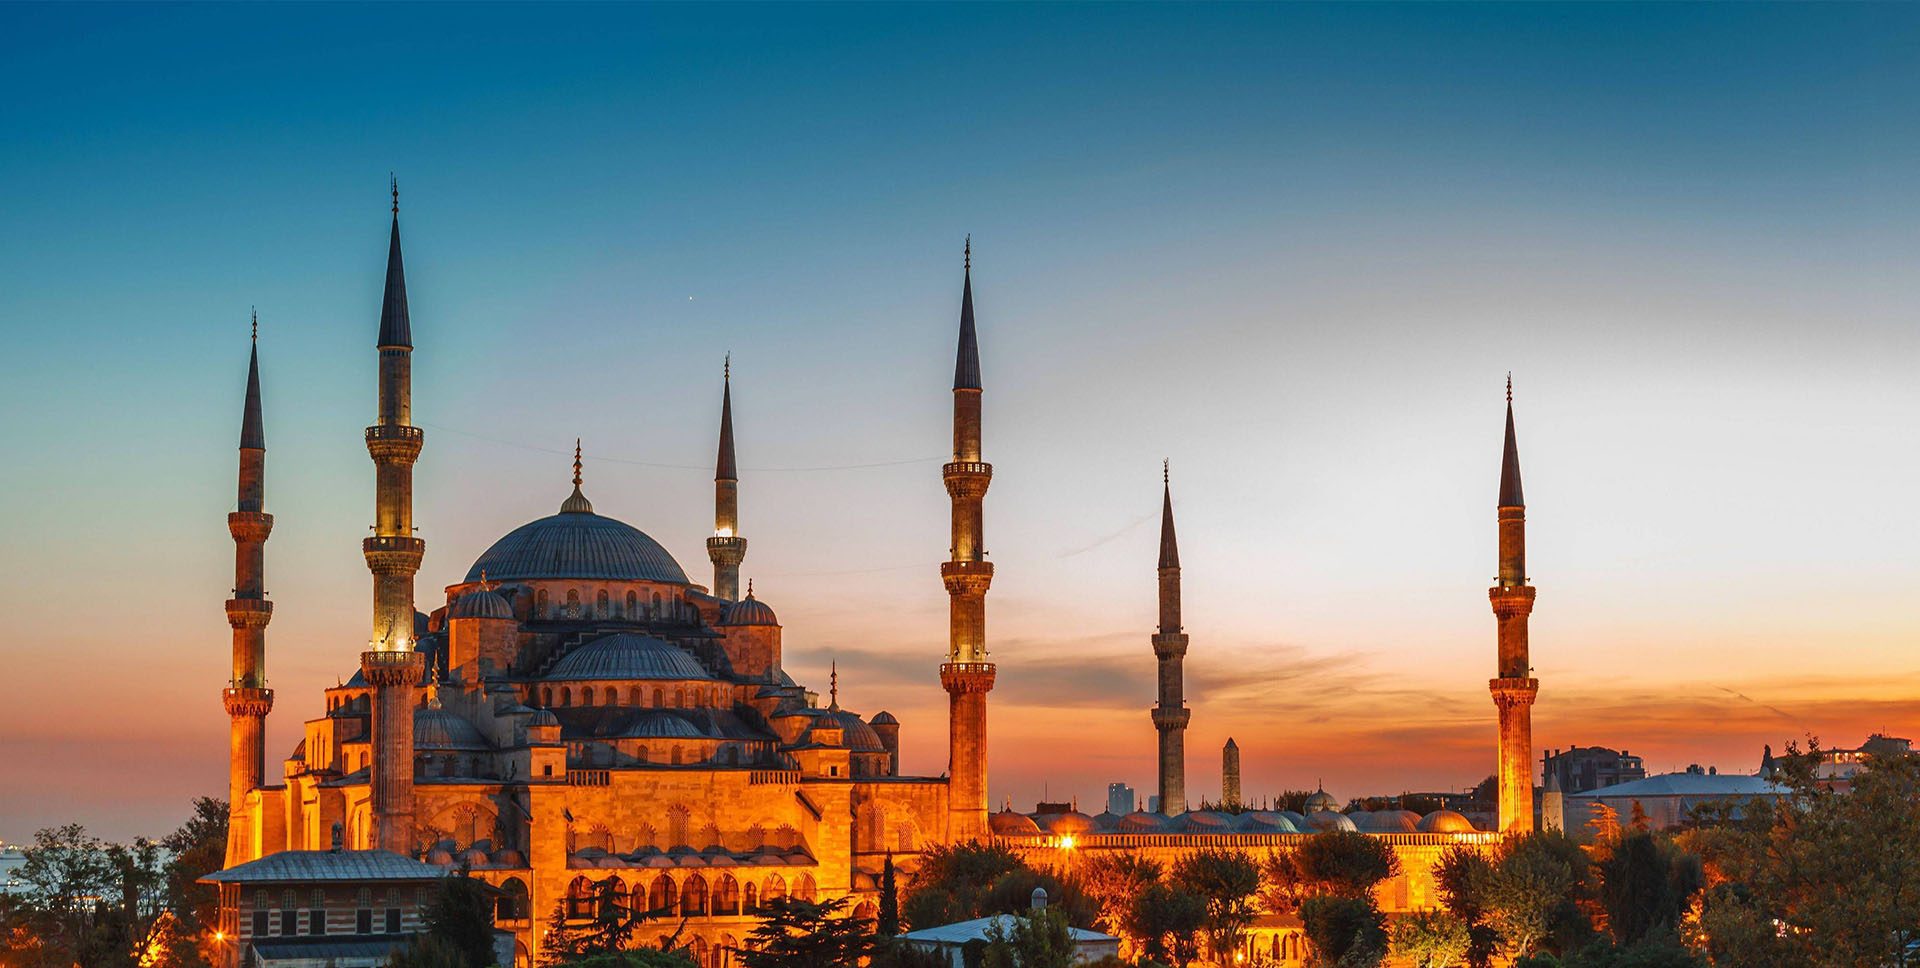 Do you know the sights of Turkey?